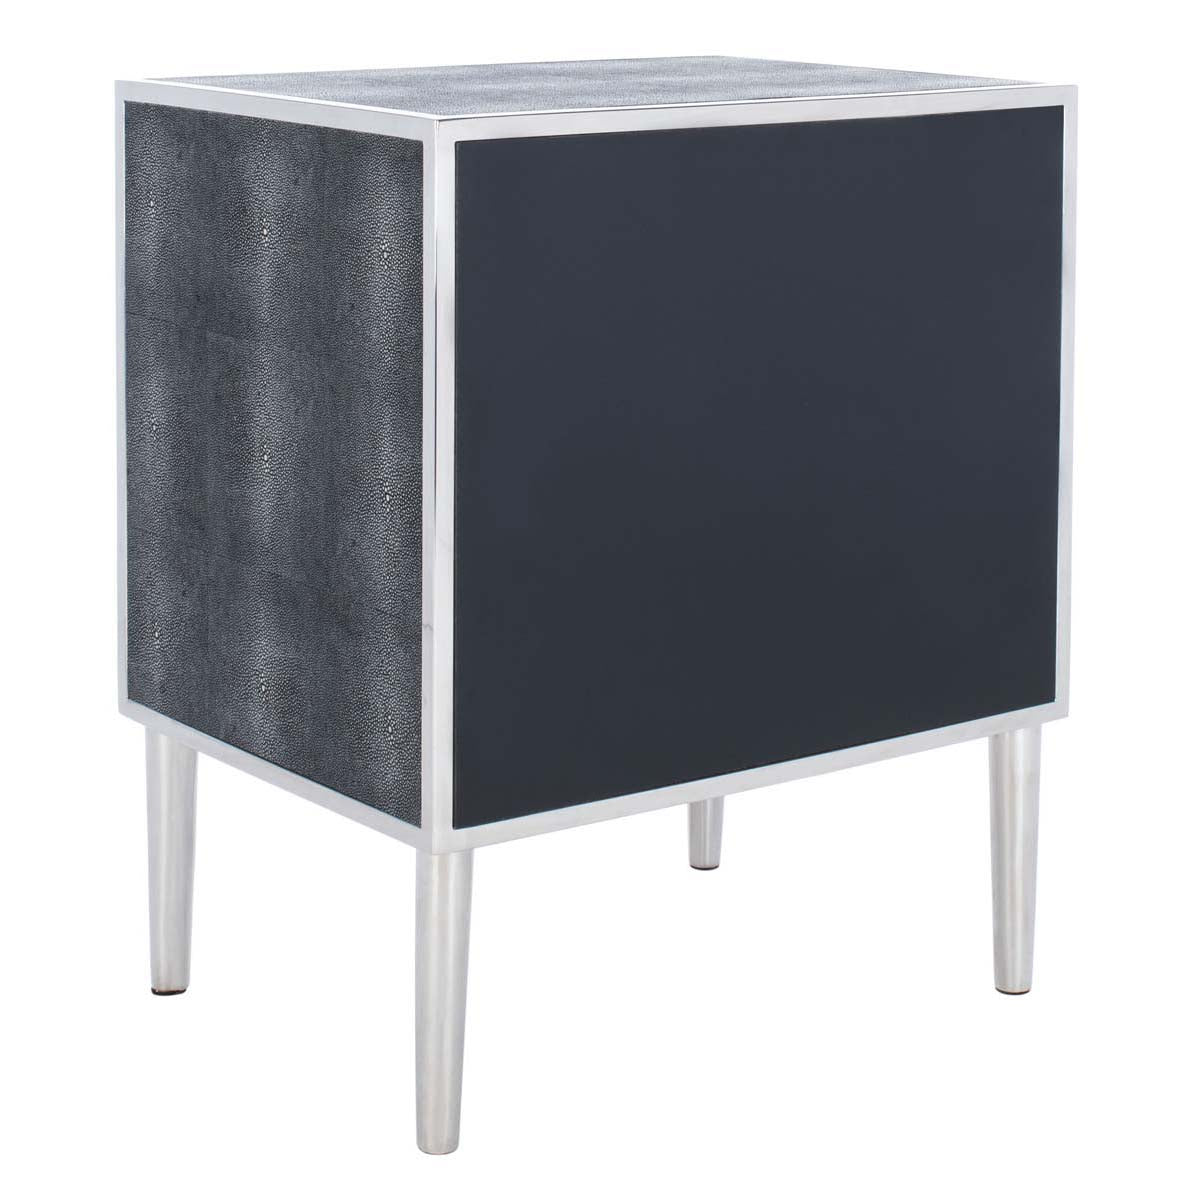 Safavieh Couture Tammy 1 Drawer Faux Shagreen Nightstand - Black / Silver